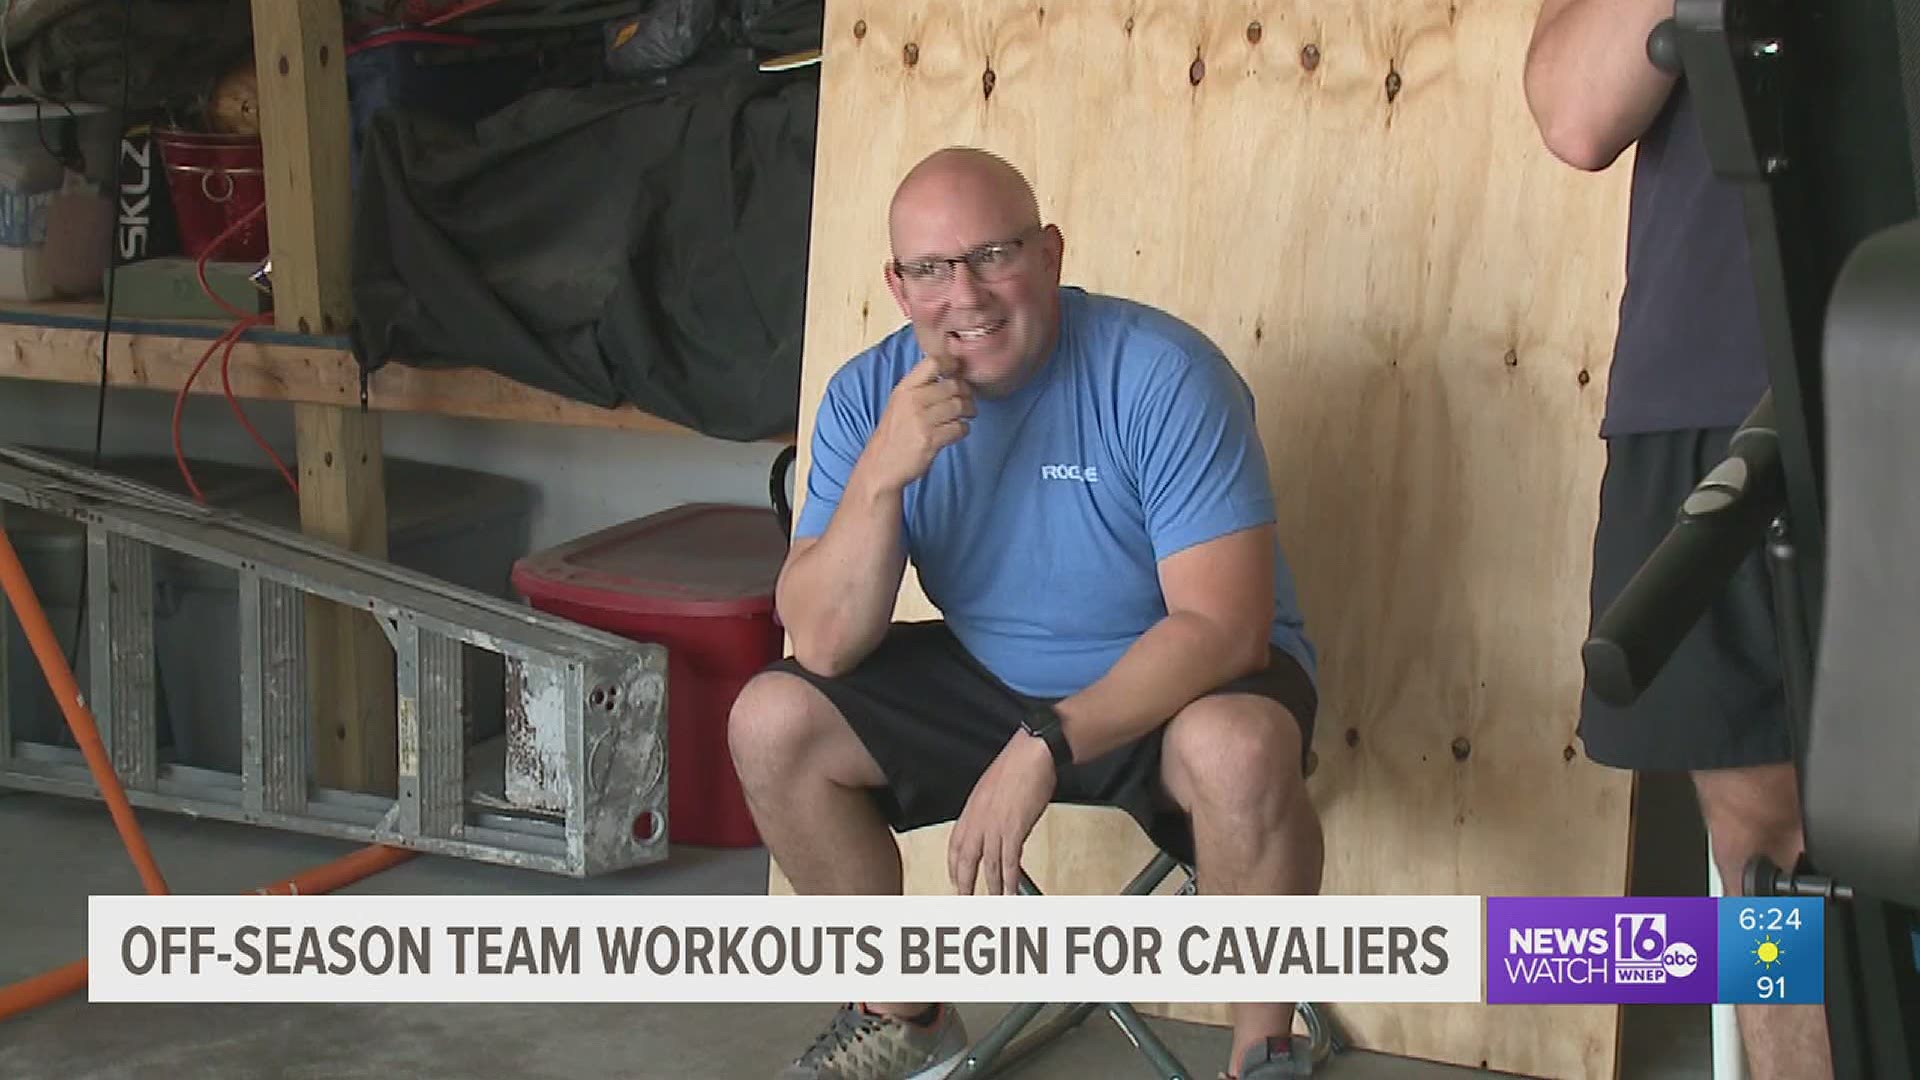 Jimmy Clancy from Pittston converted his garage into a home gym for his son and his friends